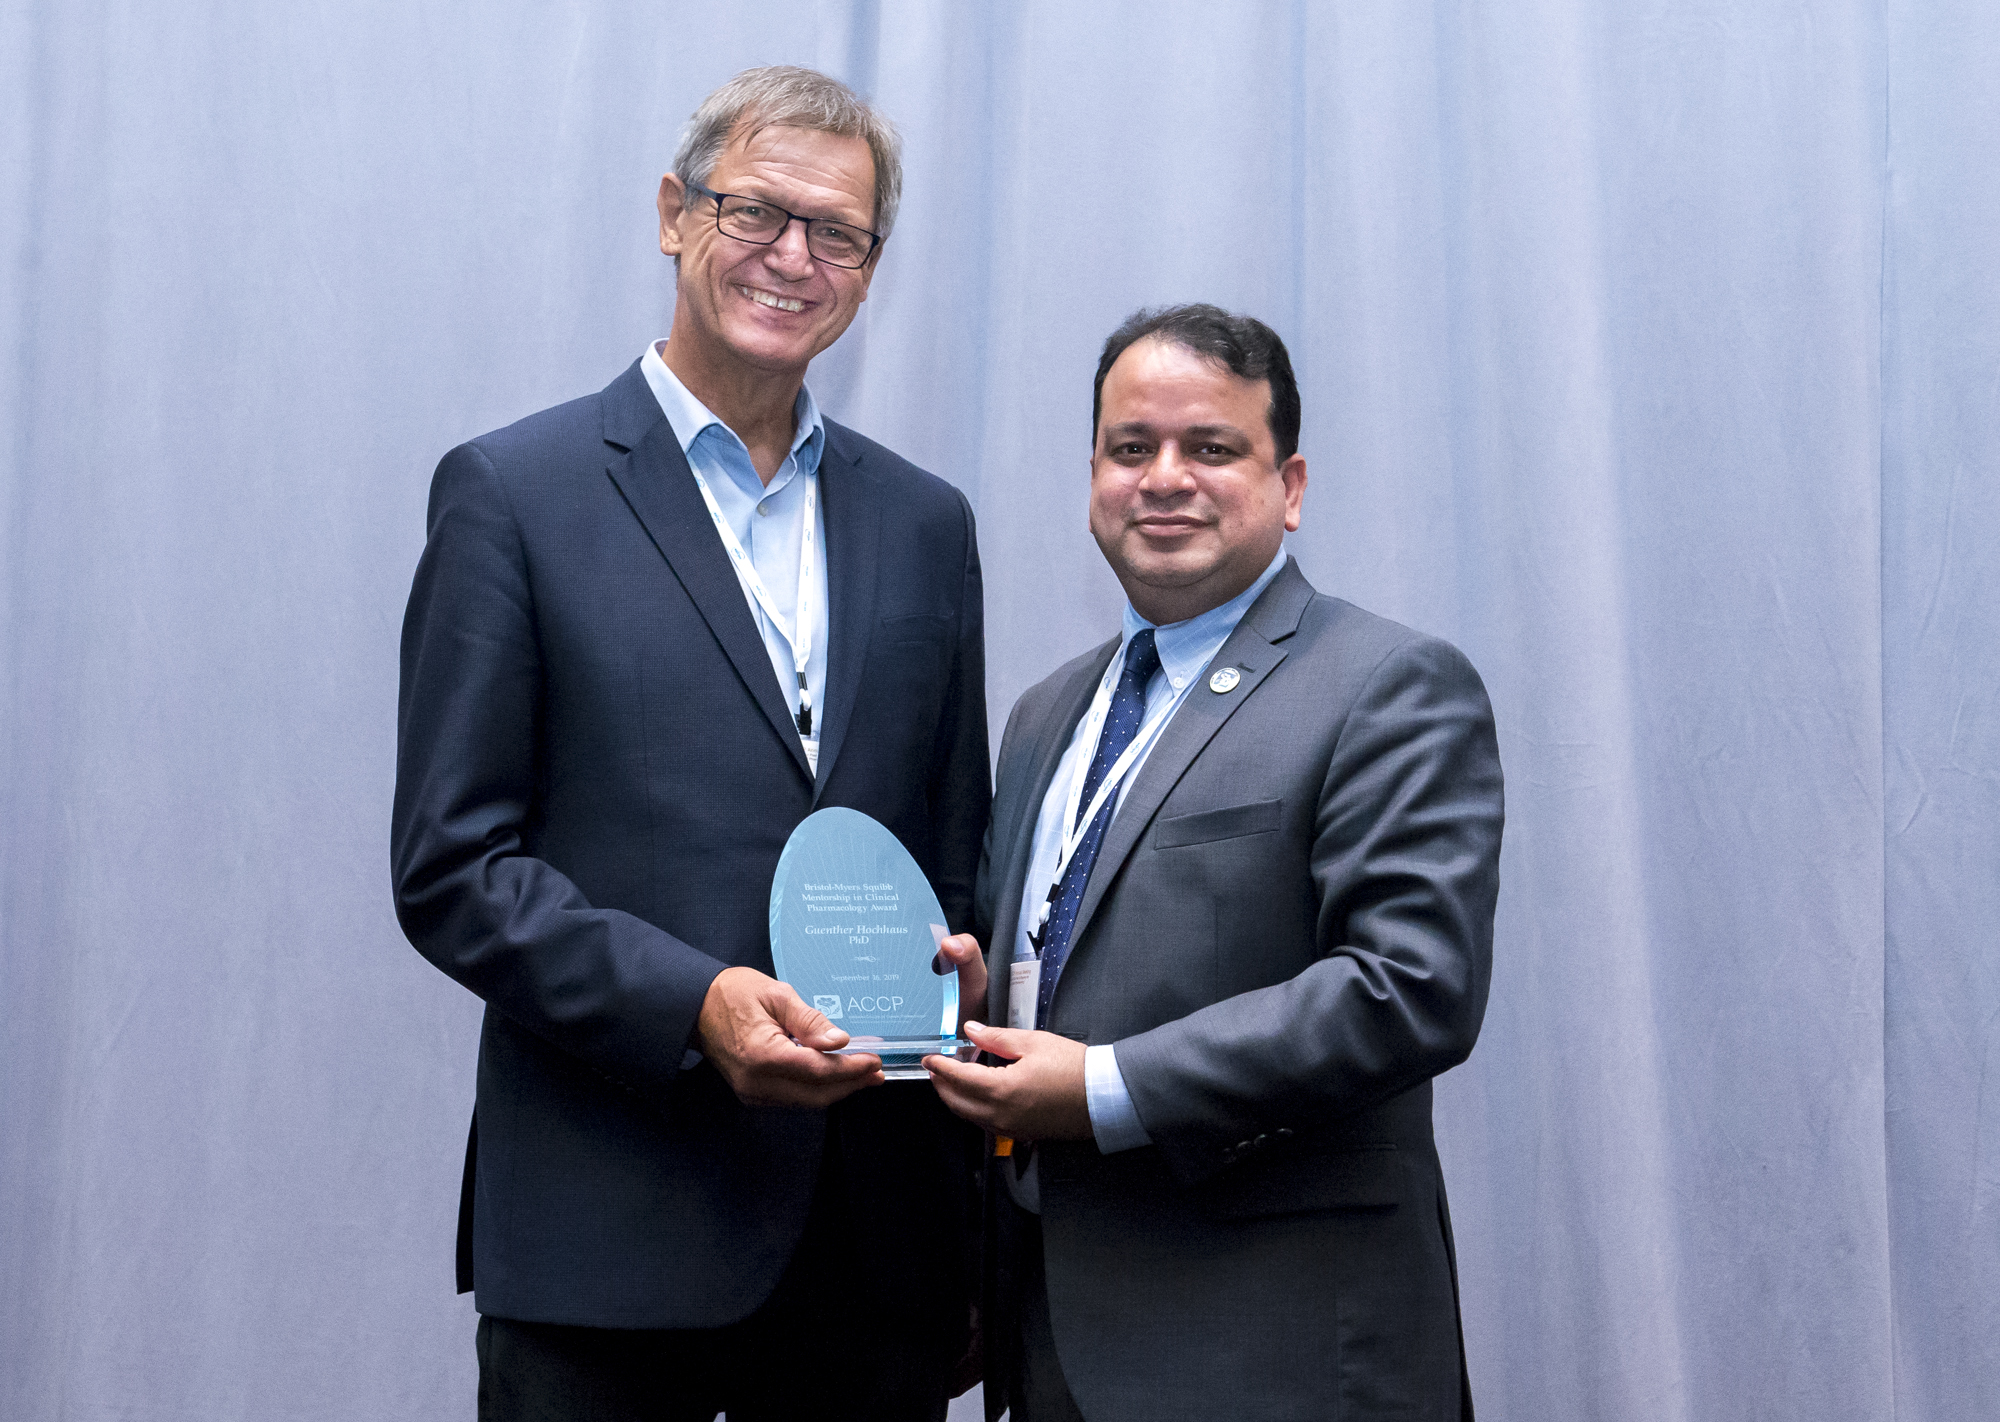 Dr. Guenther Hochhaus receives the  Bristol-Myers Squibb Mentorship in Clinical Pharmacology Award